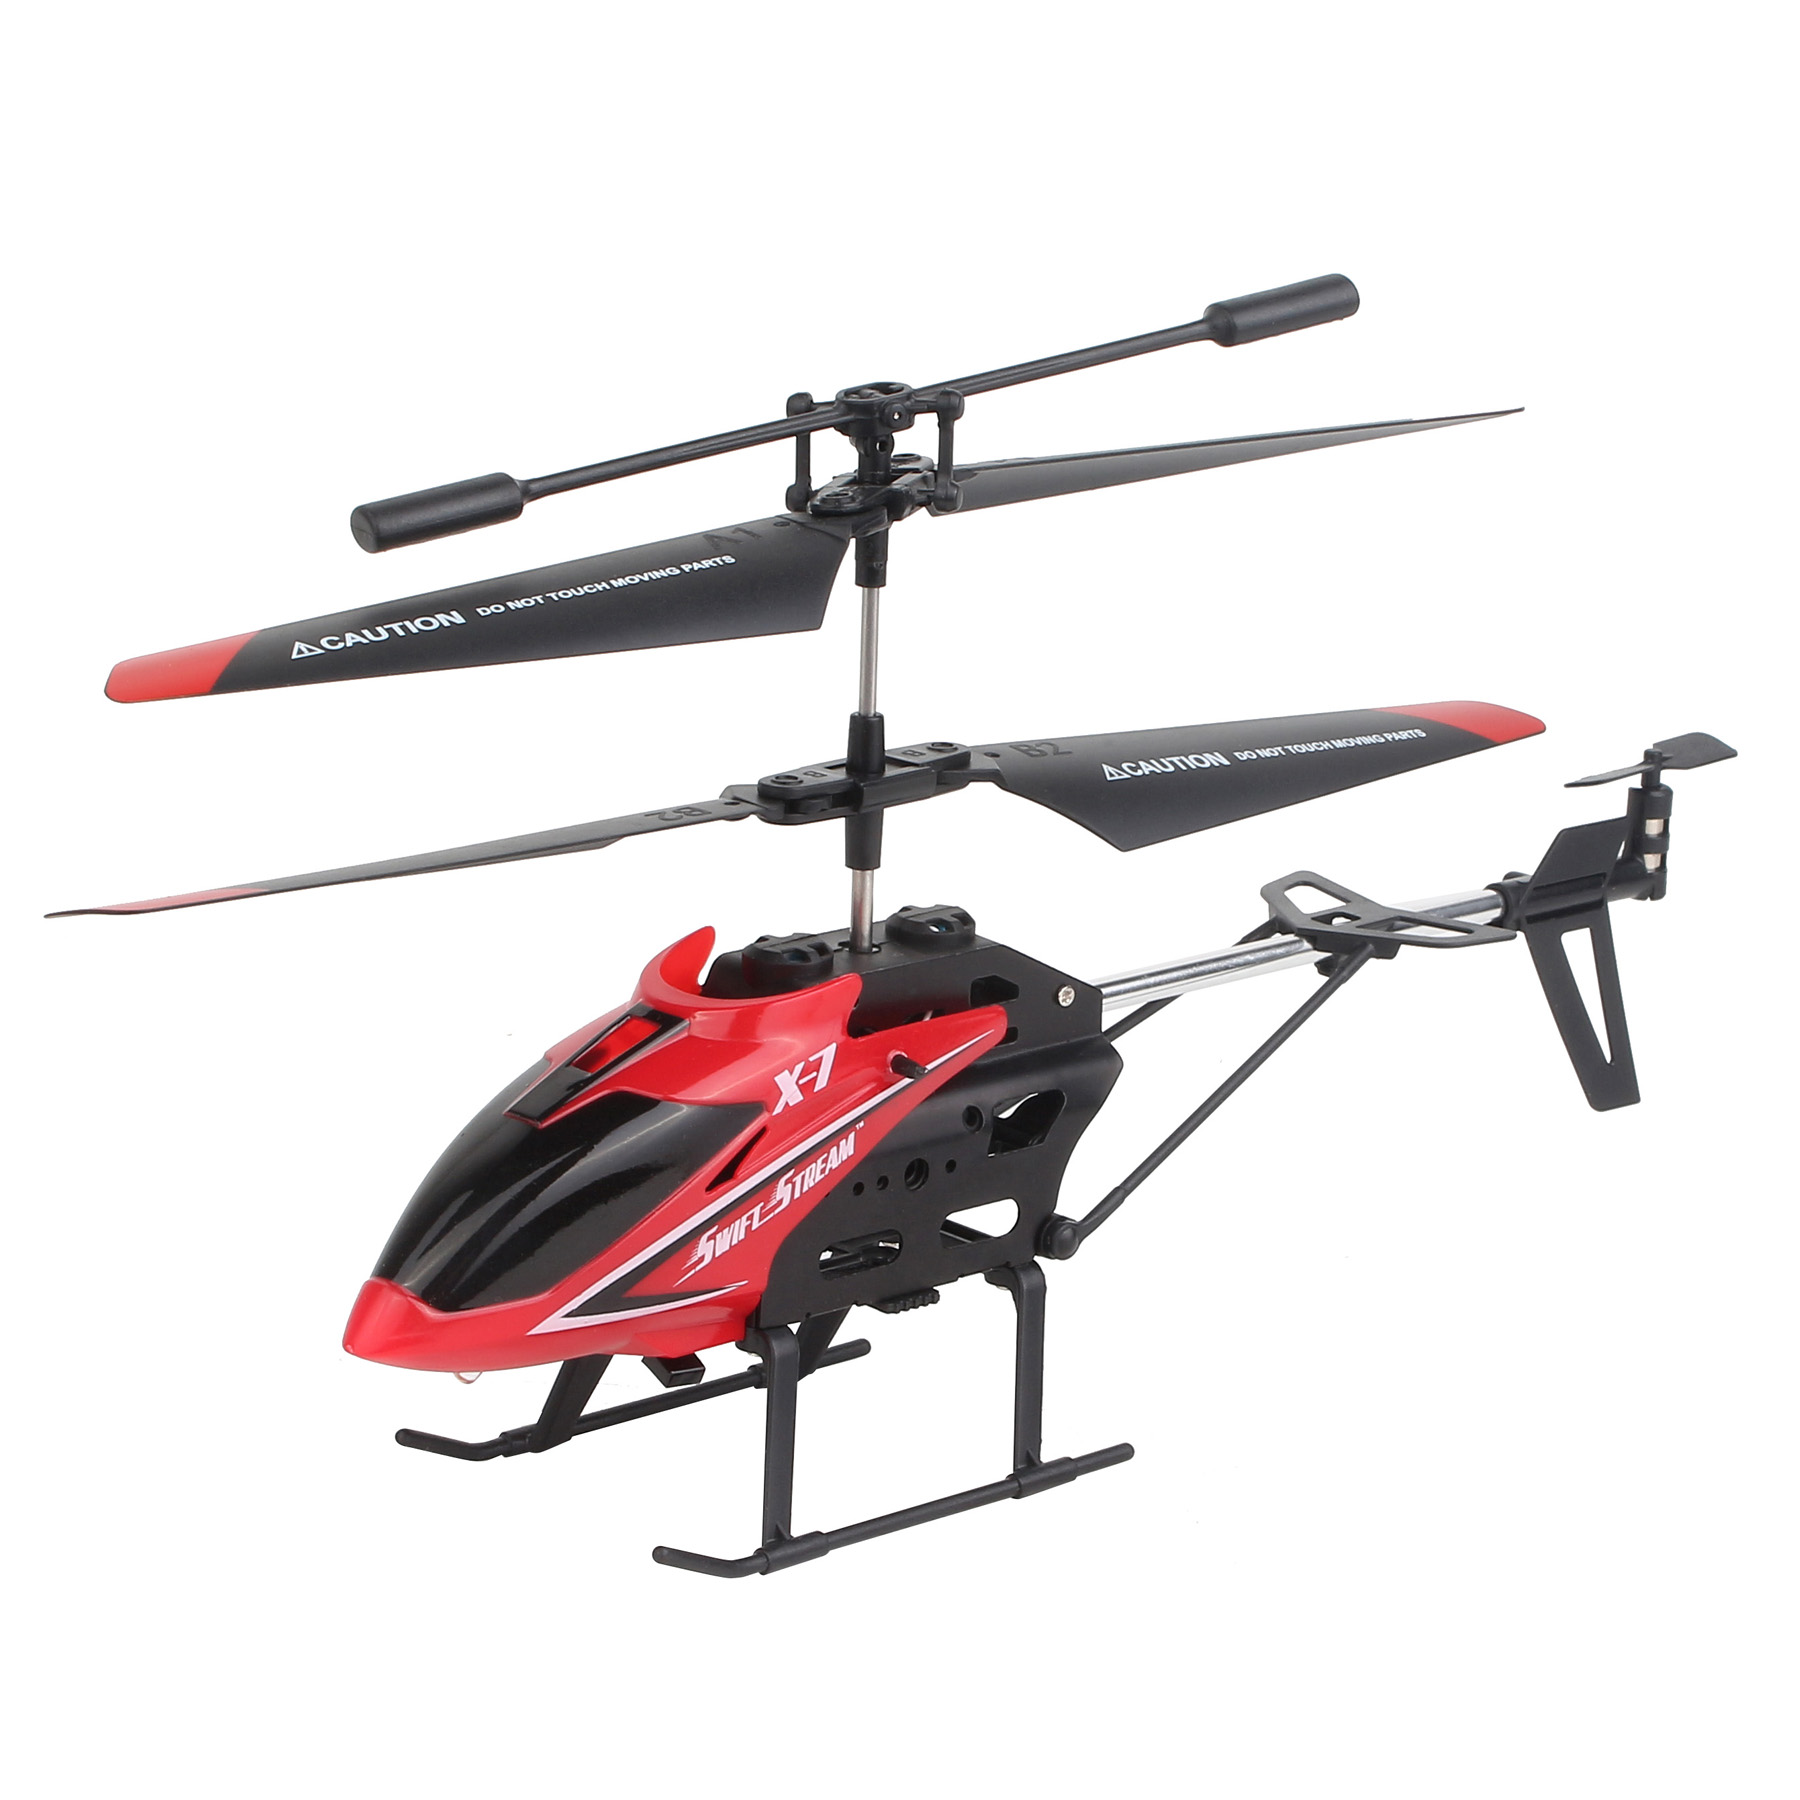 Swift Stream RC  Remote Control Helicopter, Red - image 1 of 5